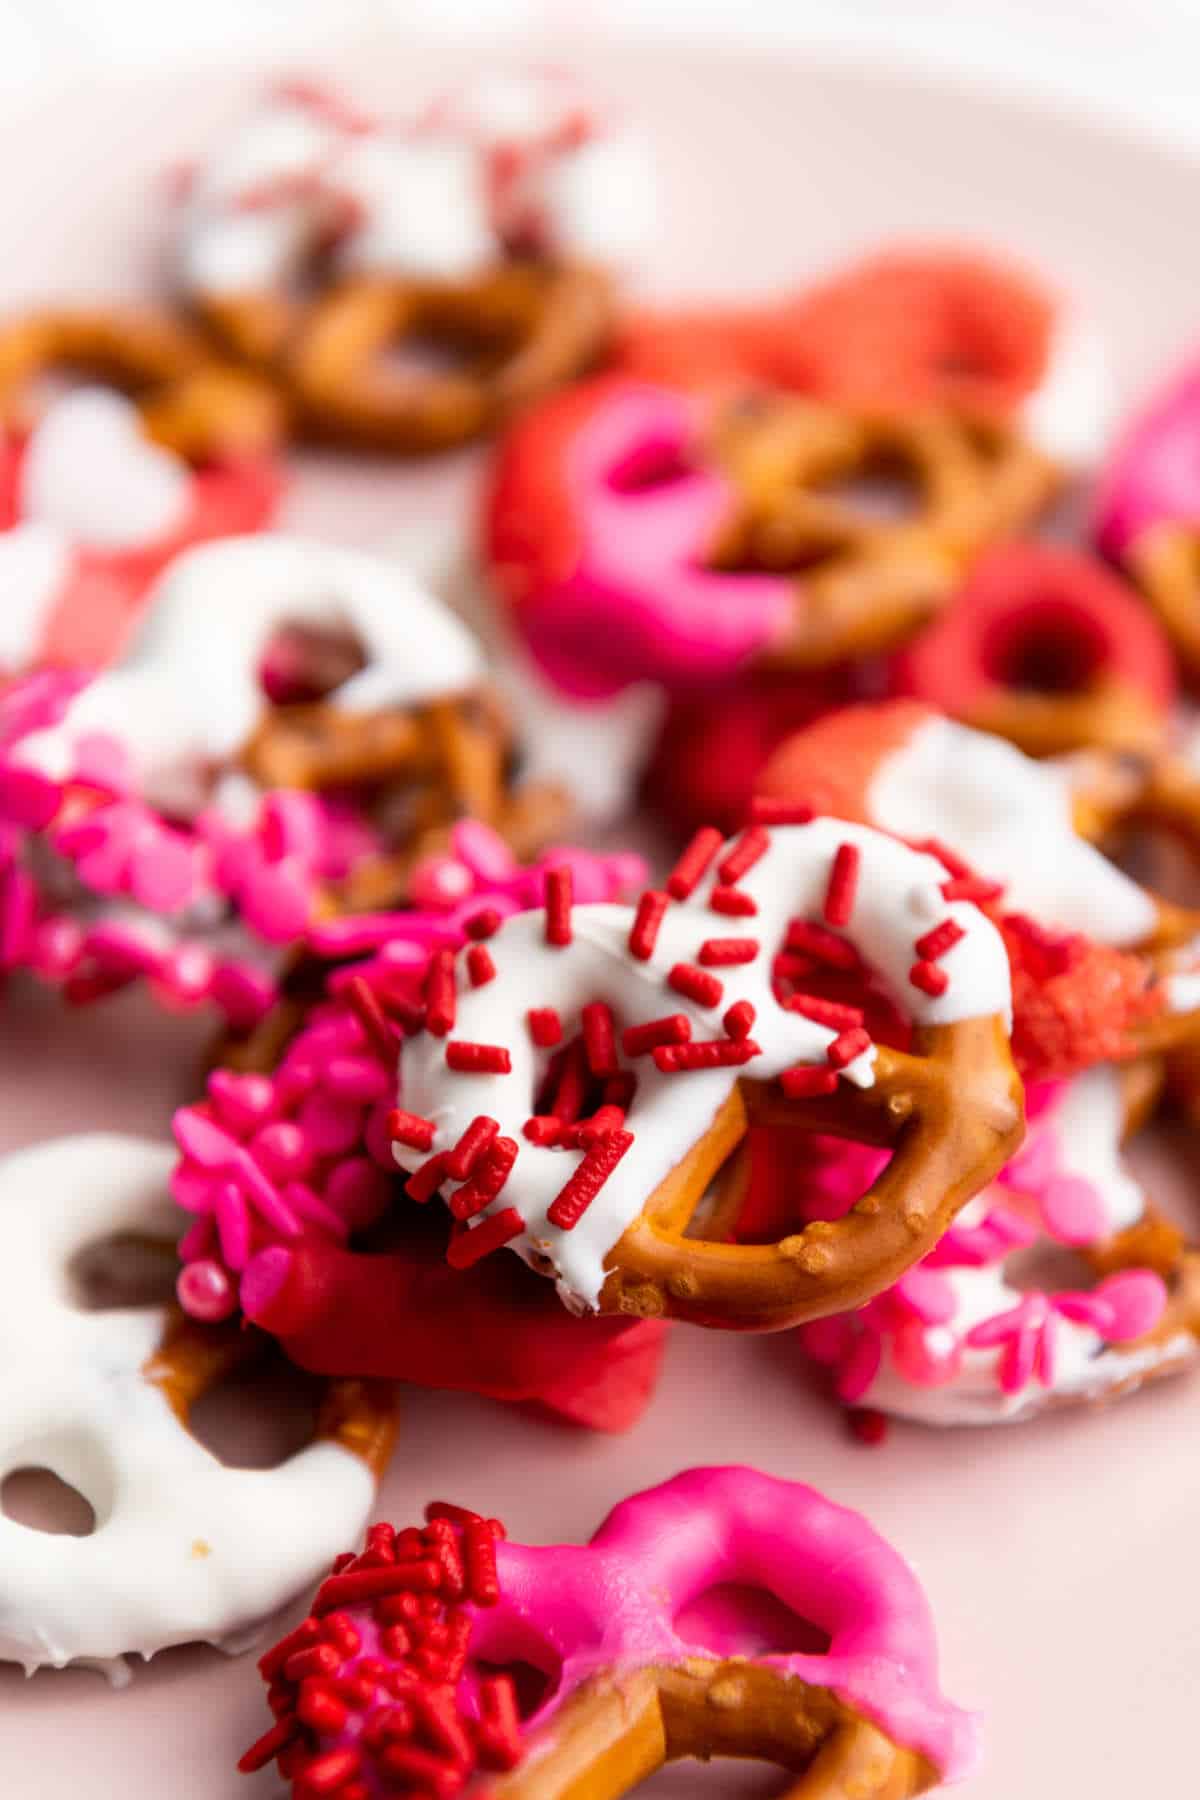 Plate of  chocolate covered pretzels valentines